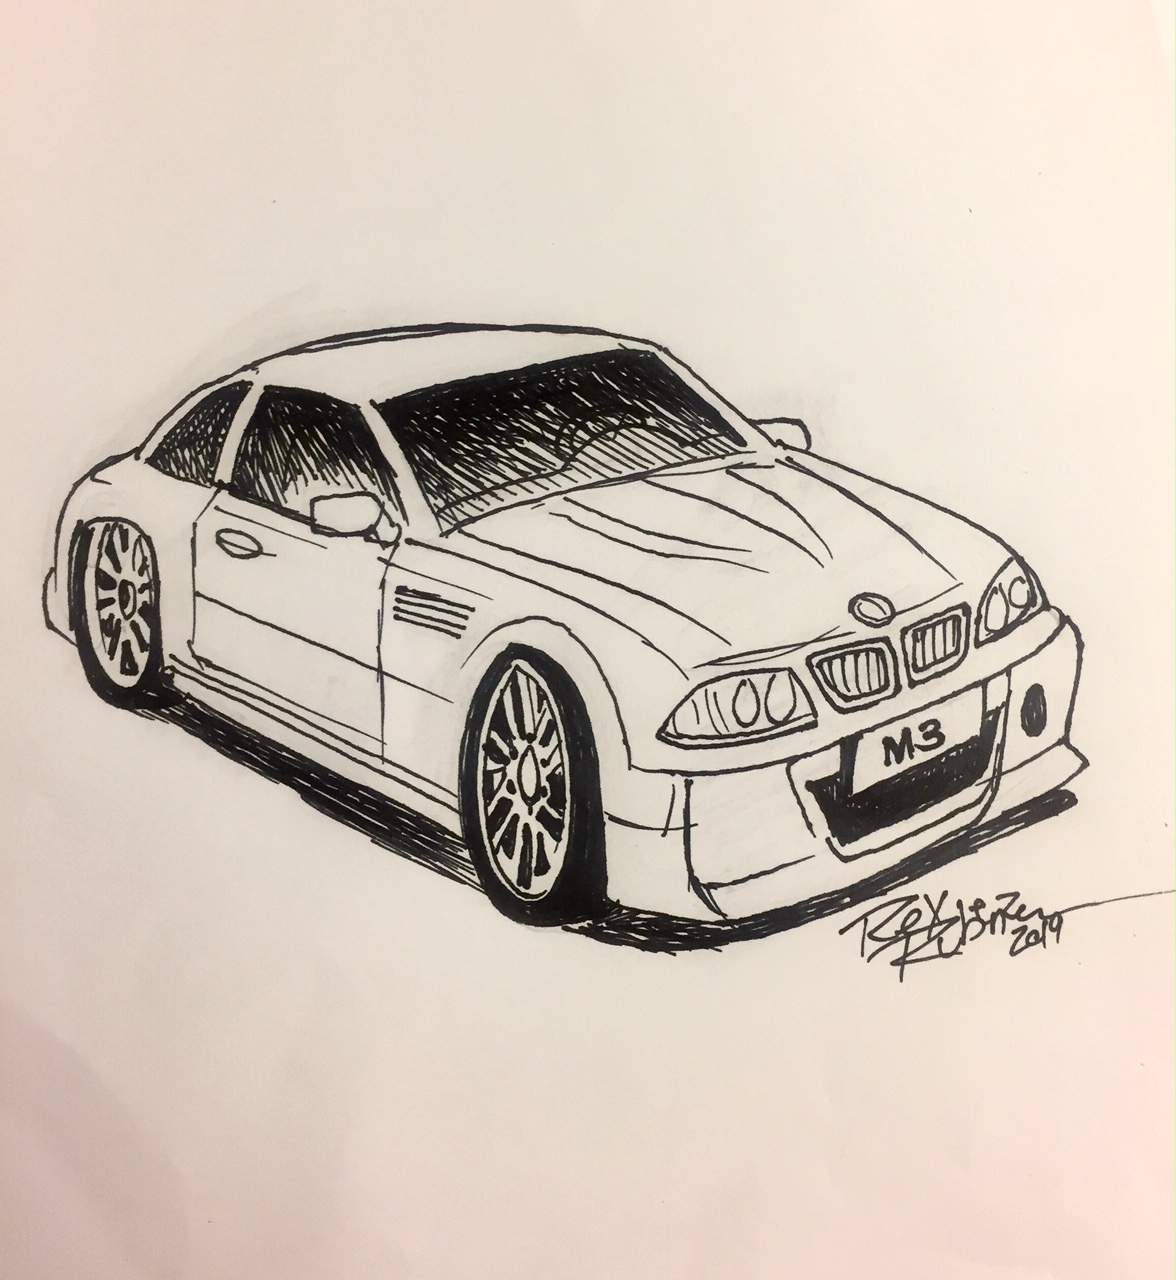 Caricature of BMW M3 drawn by Rex